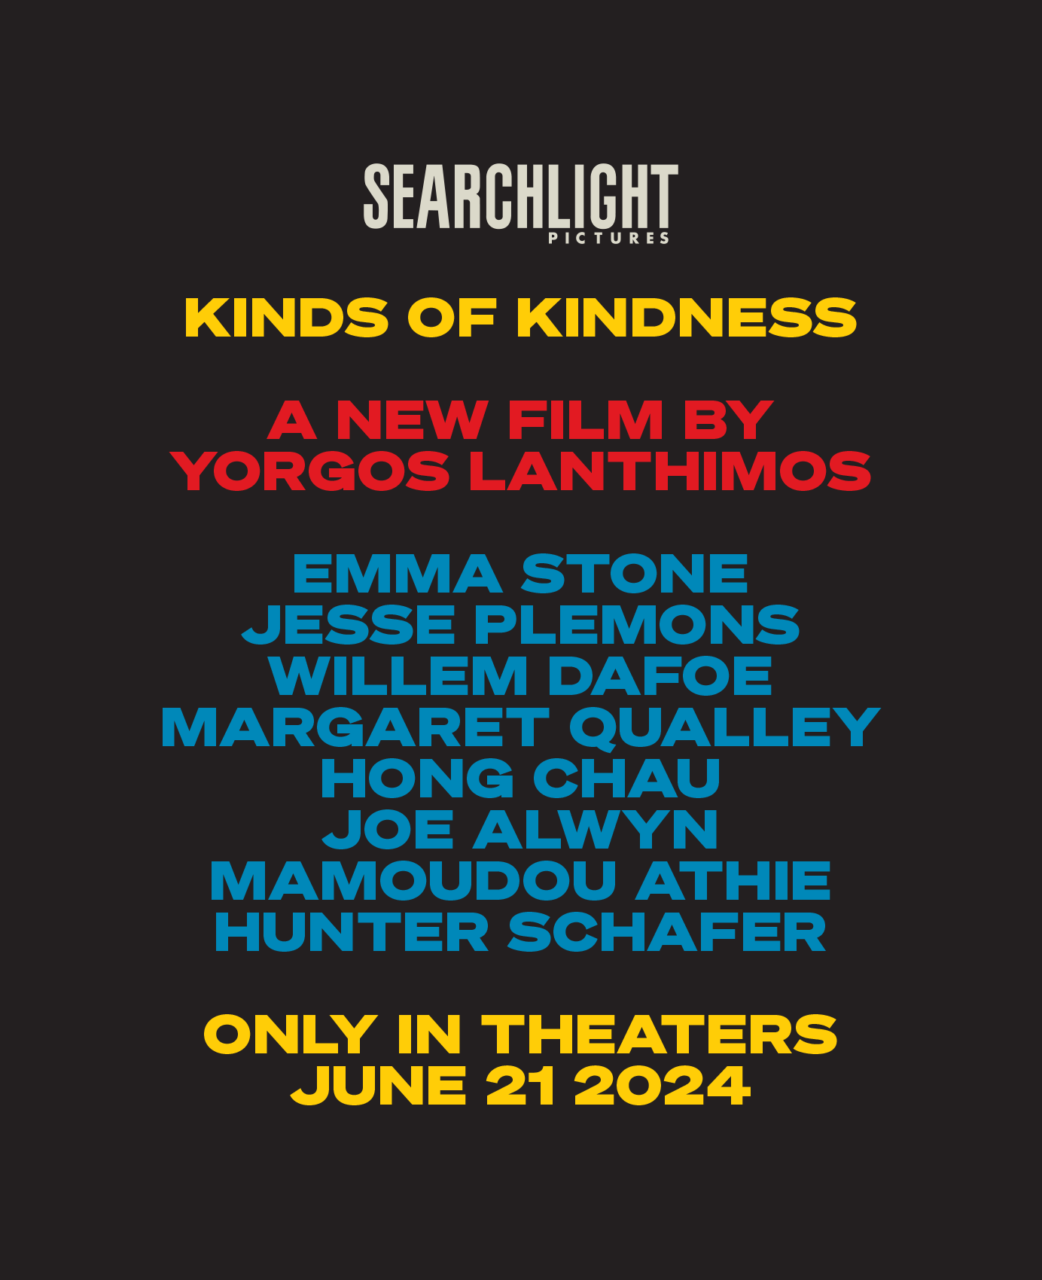 Kinds Of Kindness poster (Searchlight Pictures)